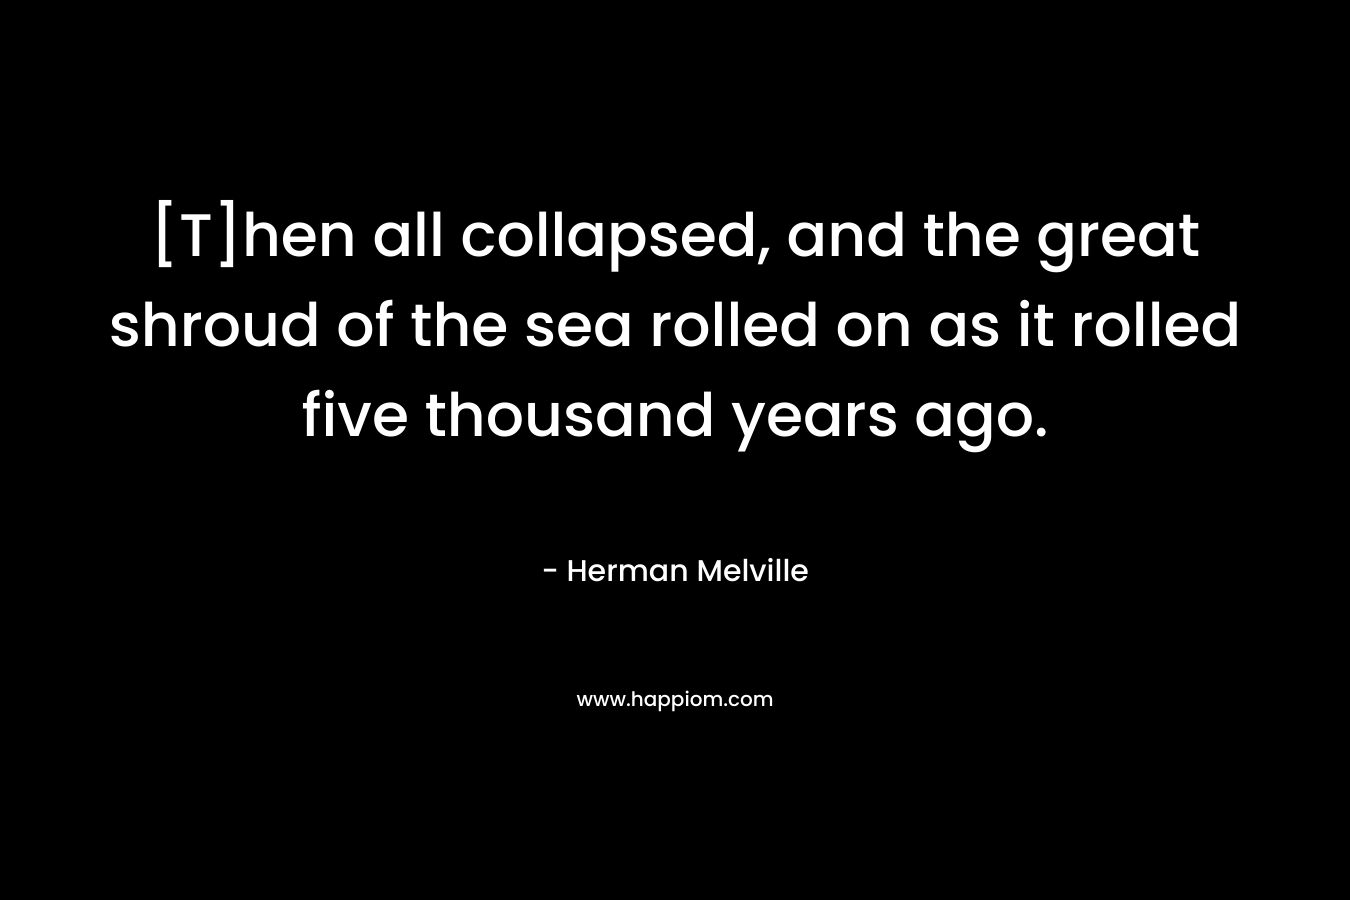 [T]hen all collapsed, and the great shroud of the sea rolled on as it rolled five thousand years ago. – Herman Melville